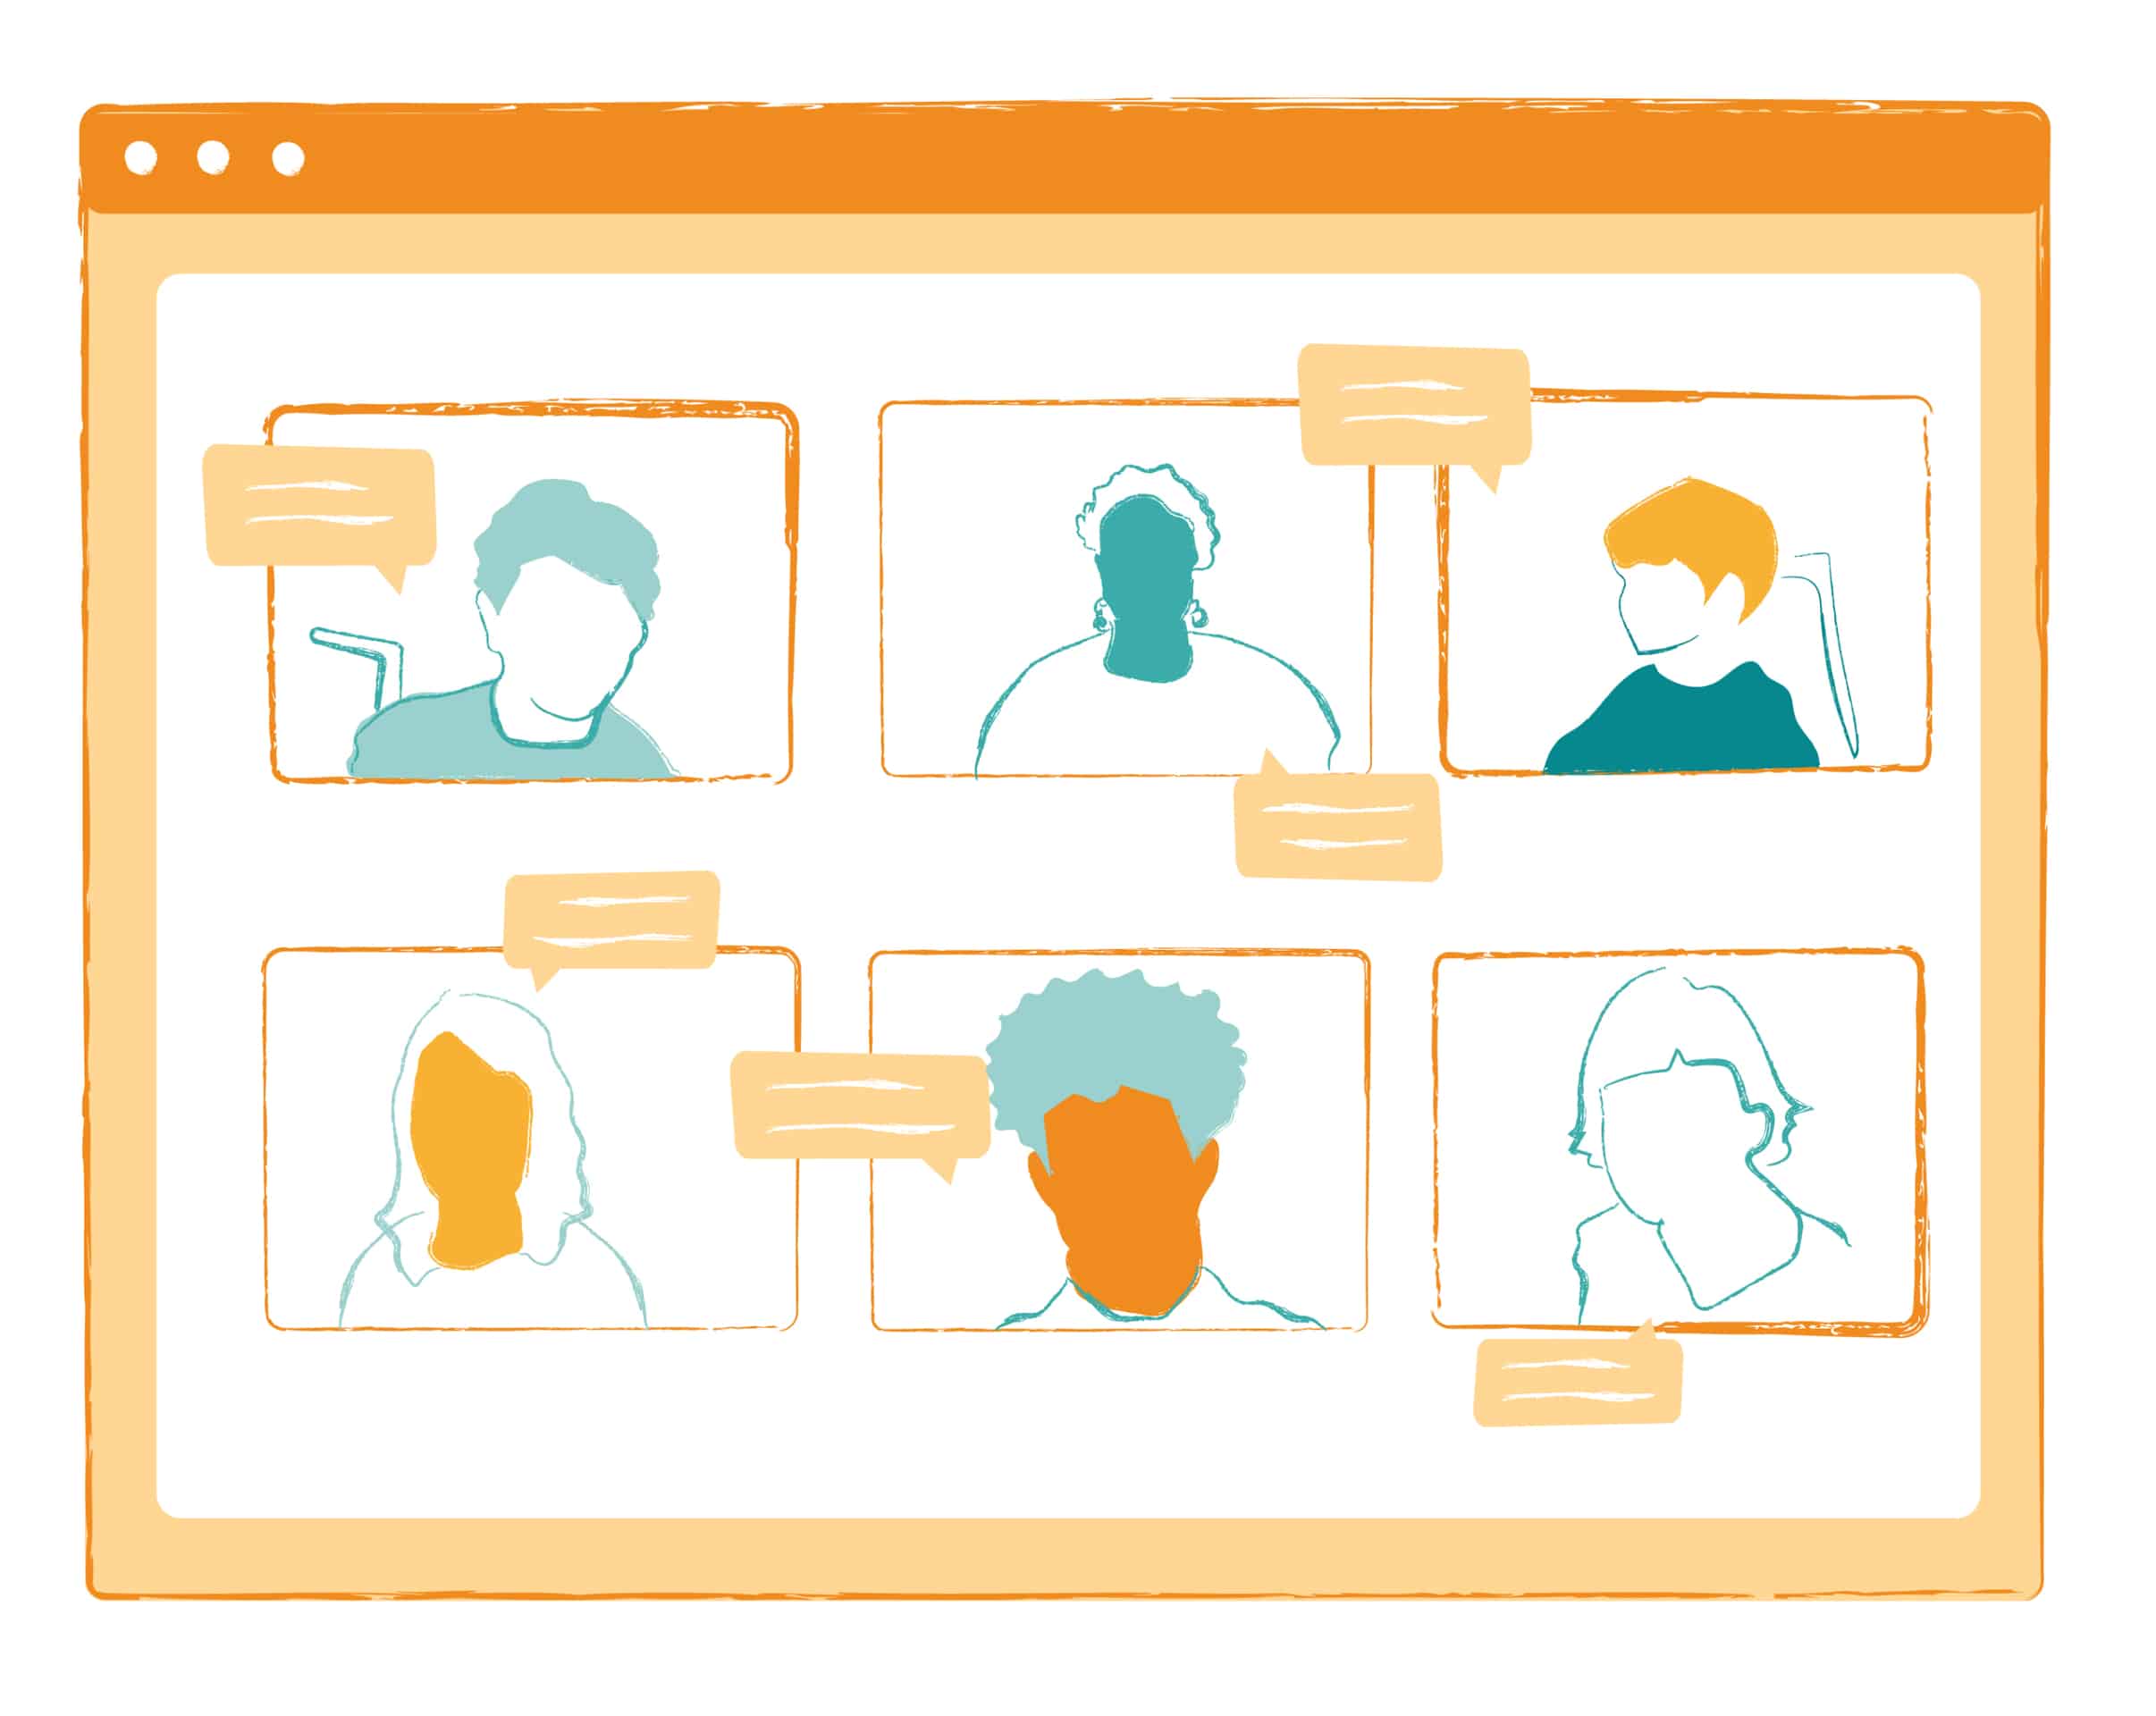 image showing different people in boxes, as if in a zoom meeting. the image colors are orange and teal and illustrated.